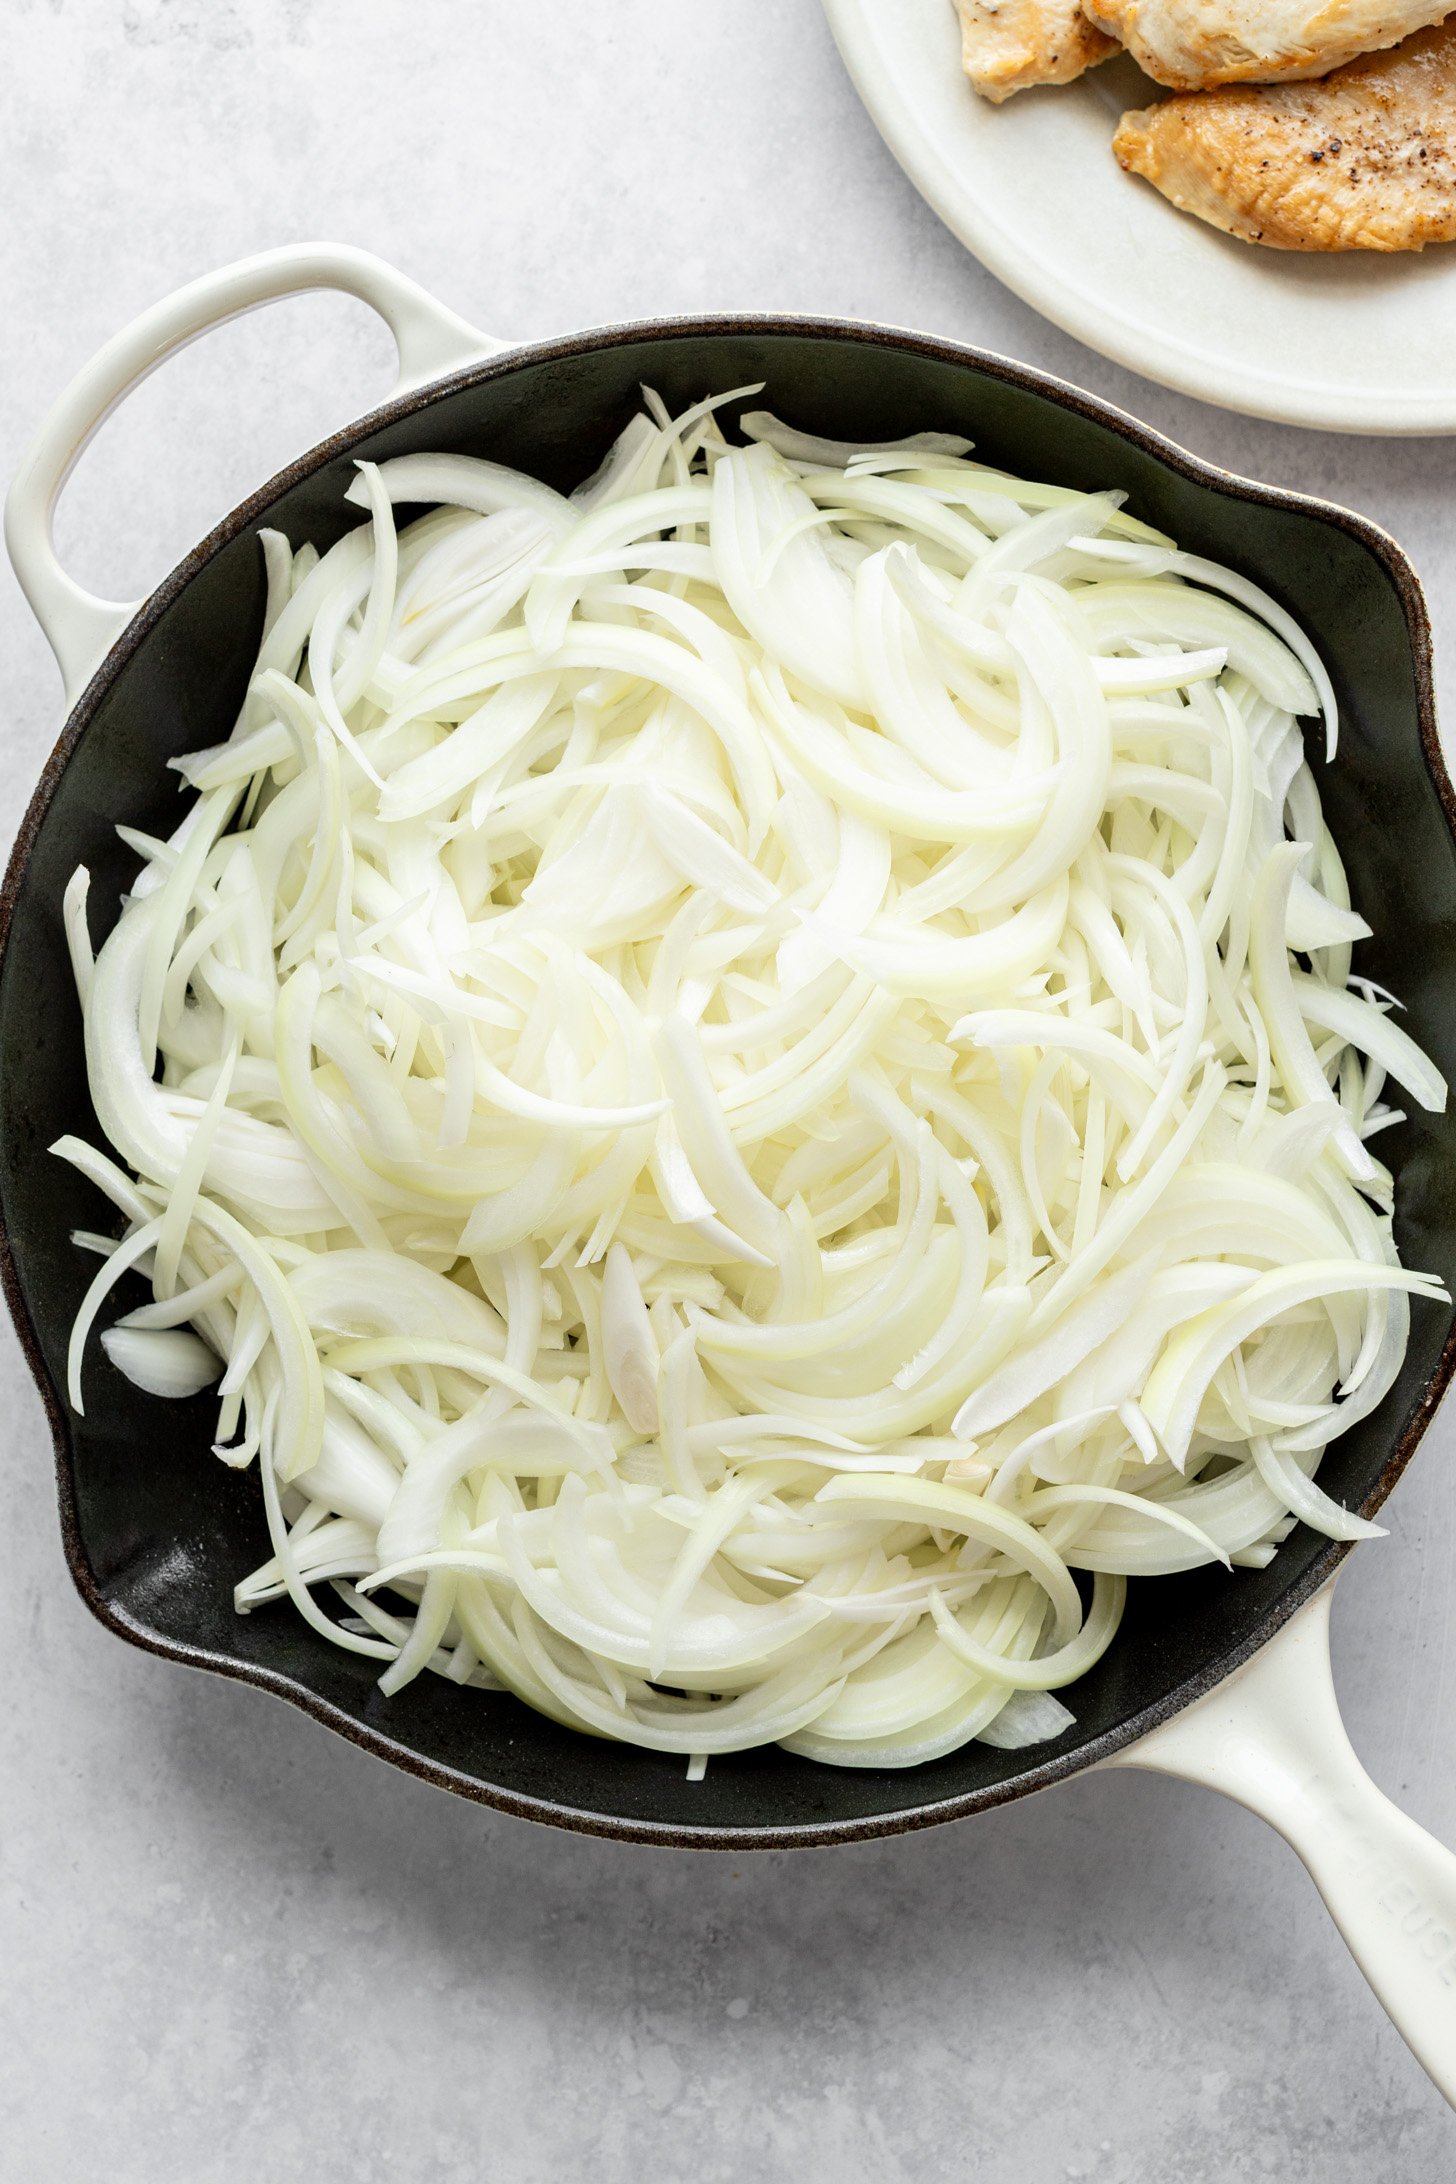 A cast iron skillet filled with raw, sliced white onions. The skillet is sitting on a countertop surrounded by a plate filled with cooked chicken.